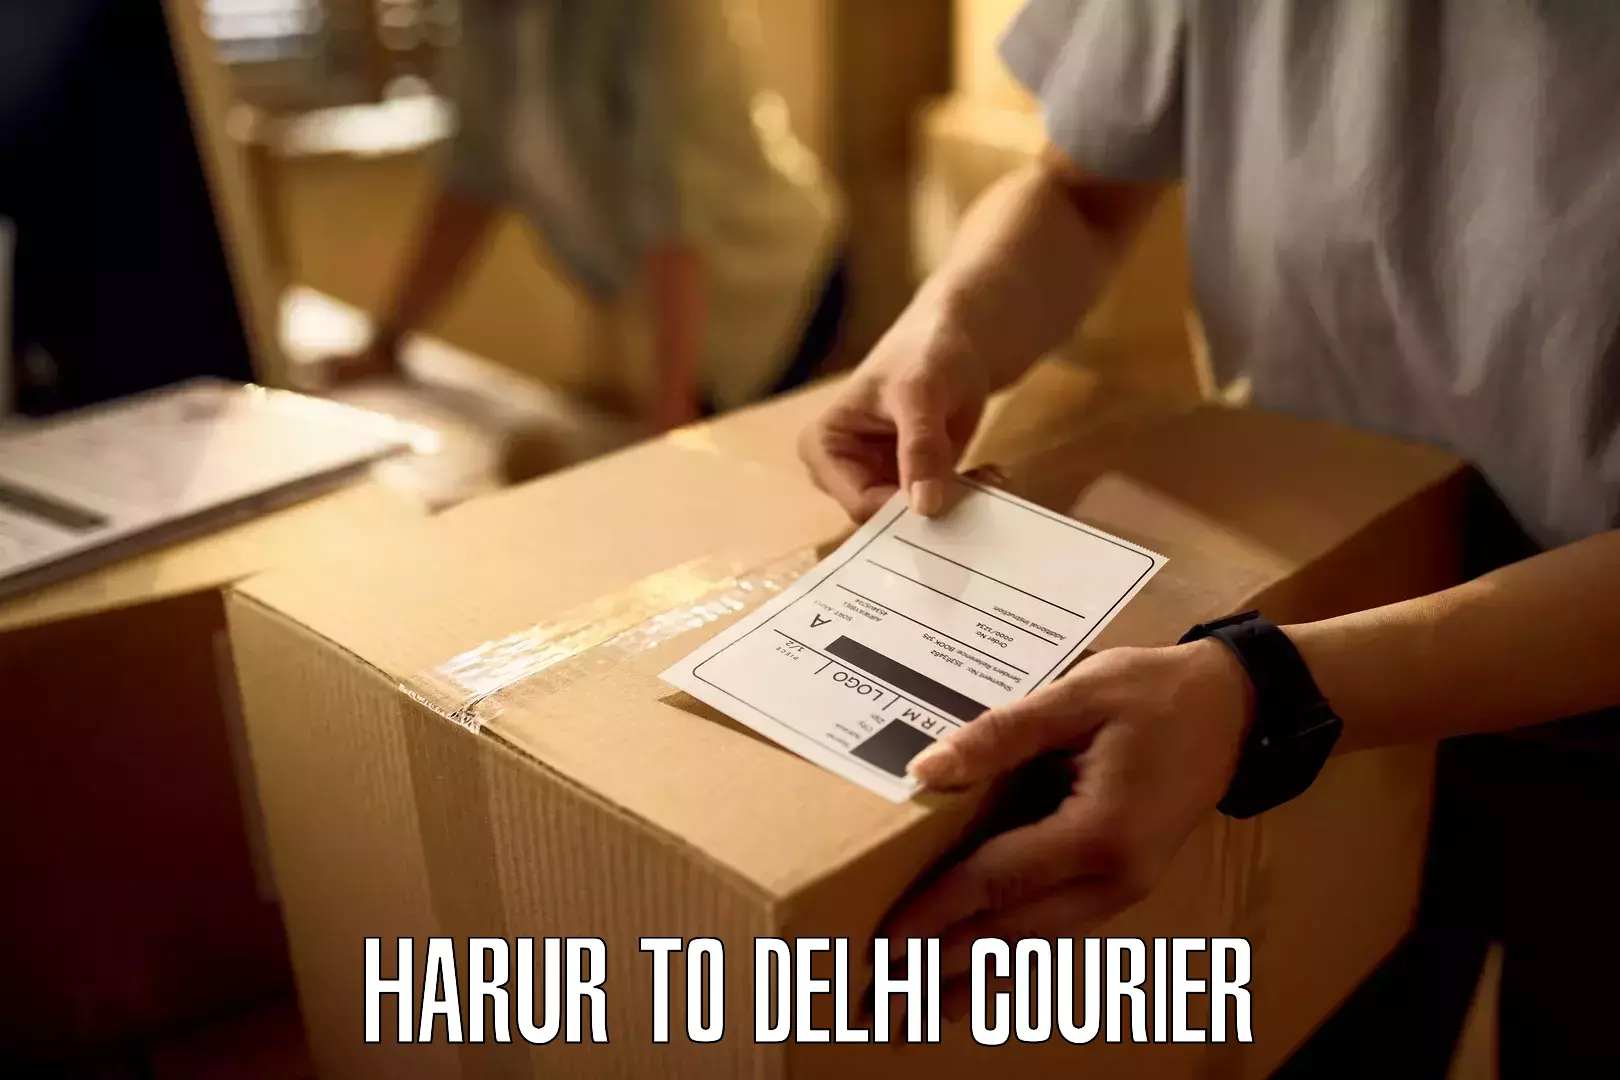 Nationwide shipping coverage Harur to Delhi Technological University DTU